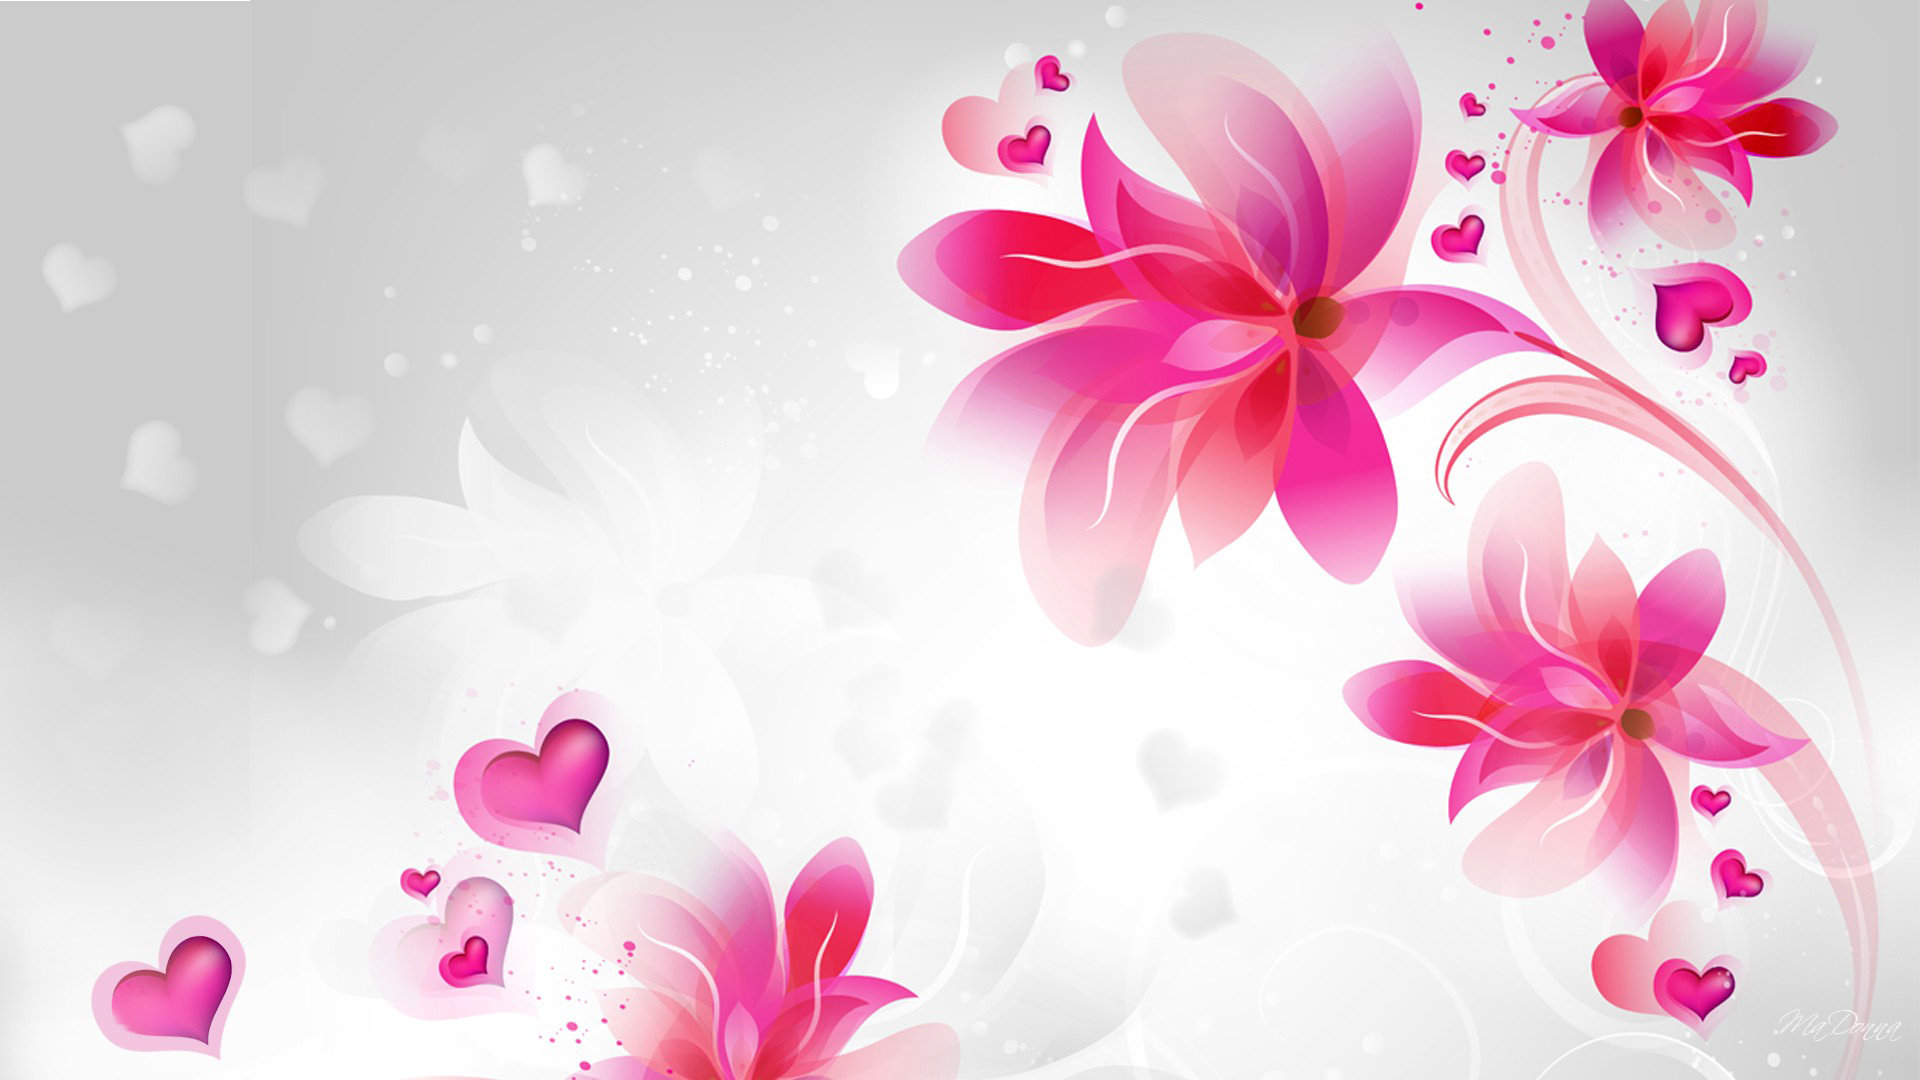 Flower Background Photos Download Free Flower Background Stock Photos  HD  Images